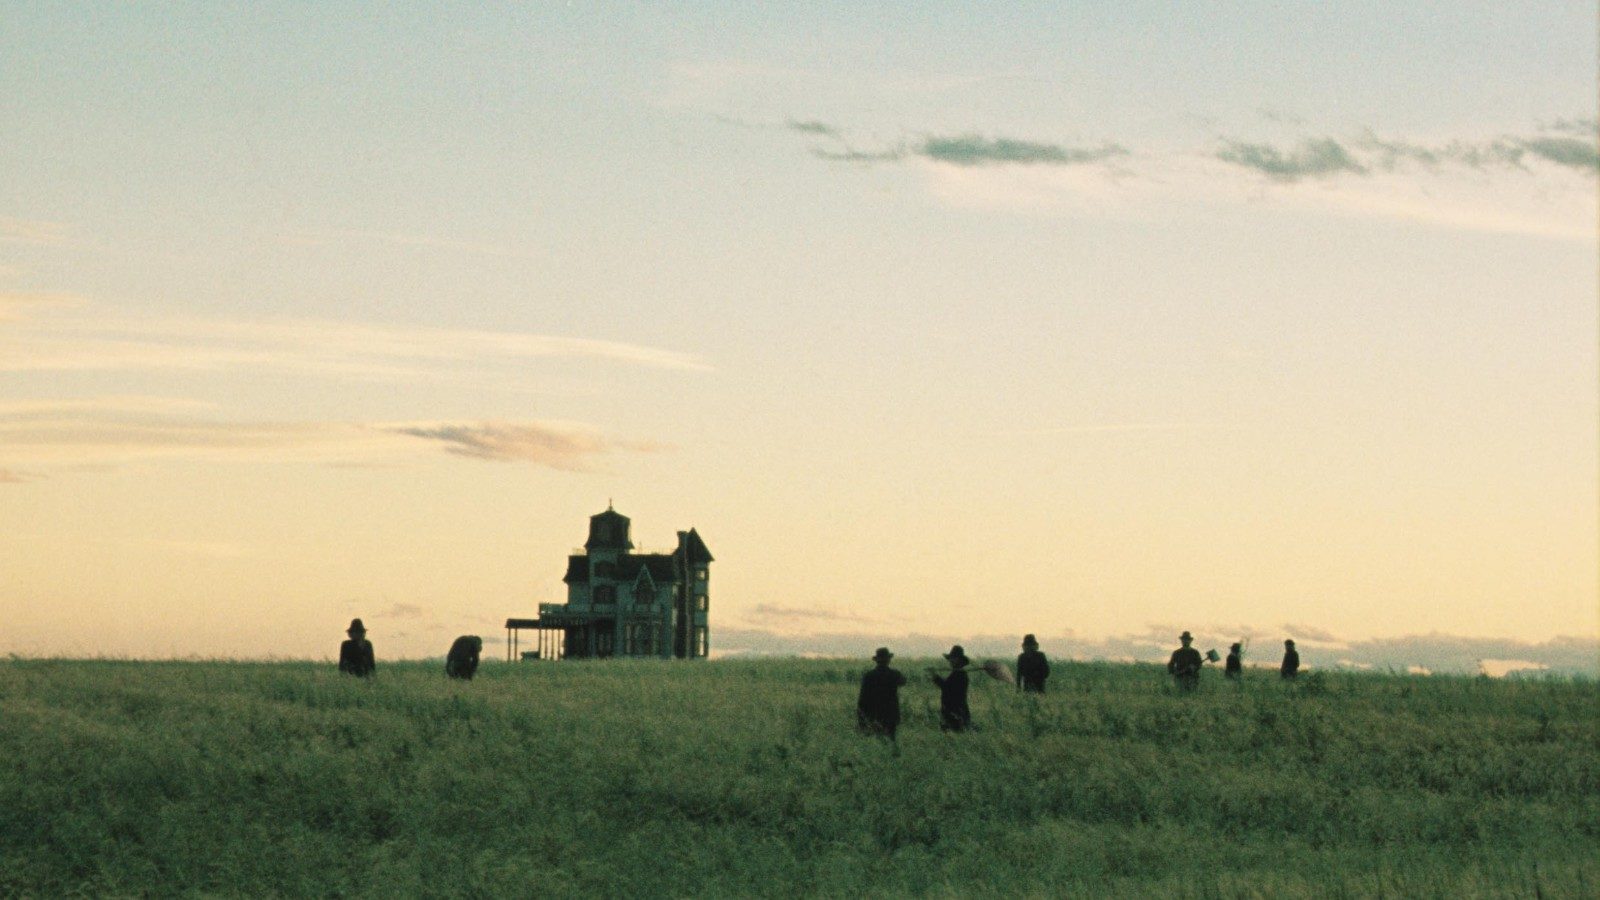 Still from the movie Days of Heaven (1978). The color image shows the silhouets of 8 people spread out in a field, and a tall house in the distance, under en open sky.